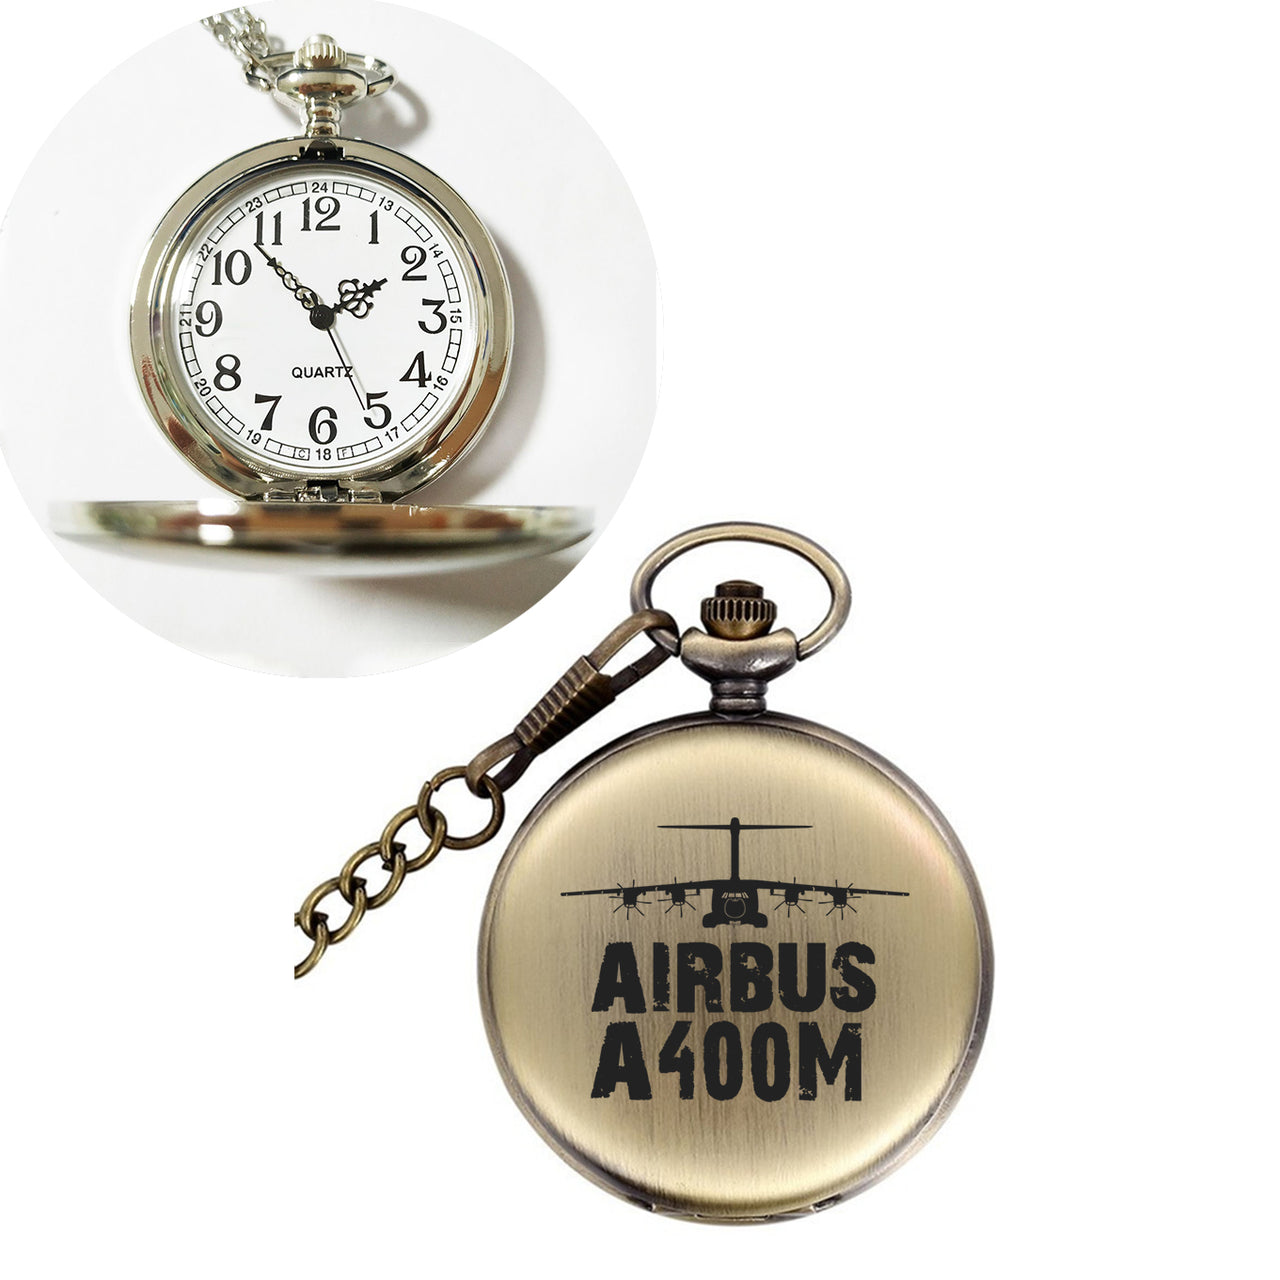 Airbus A400M & Plane Designed Pocket Watches